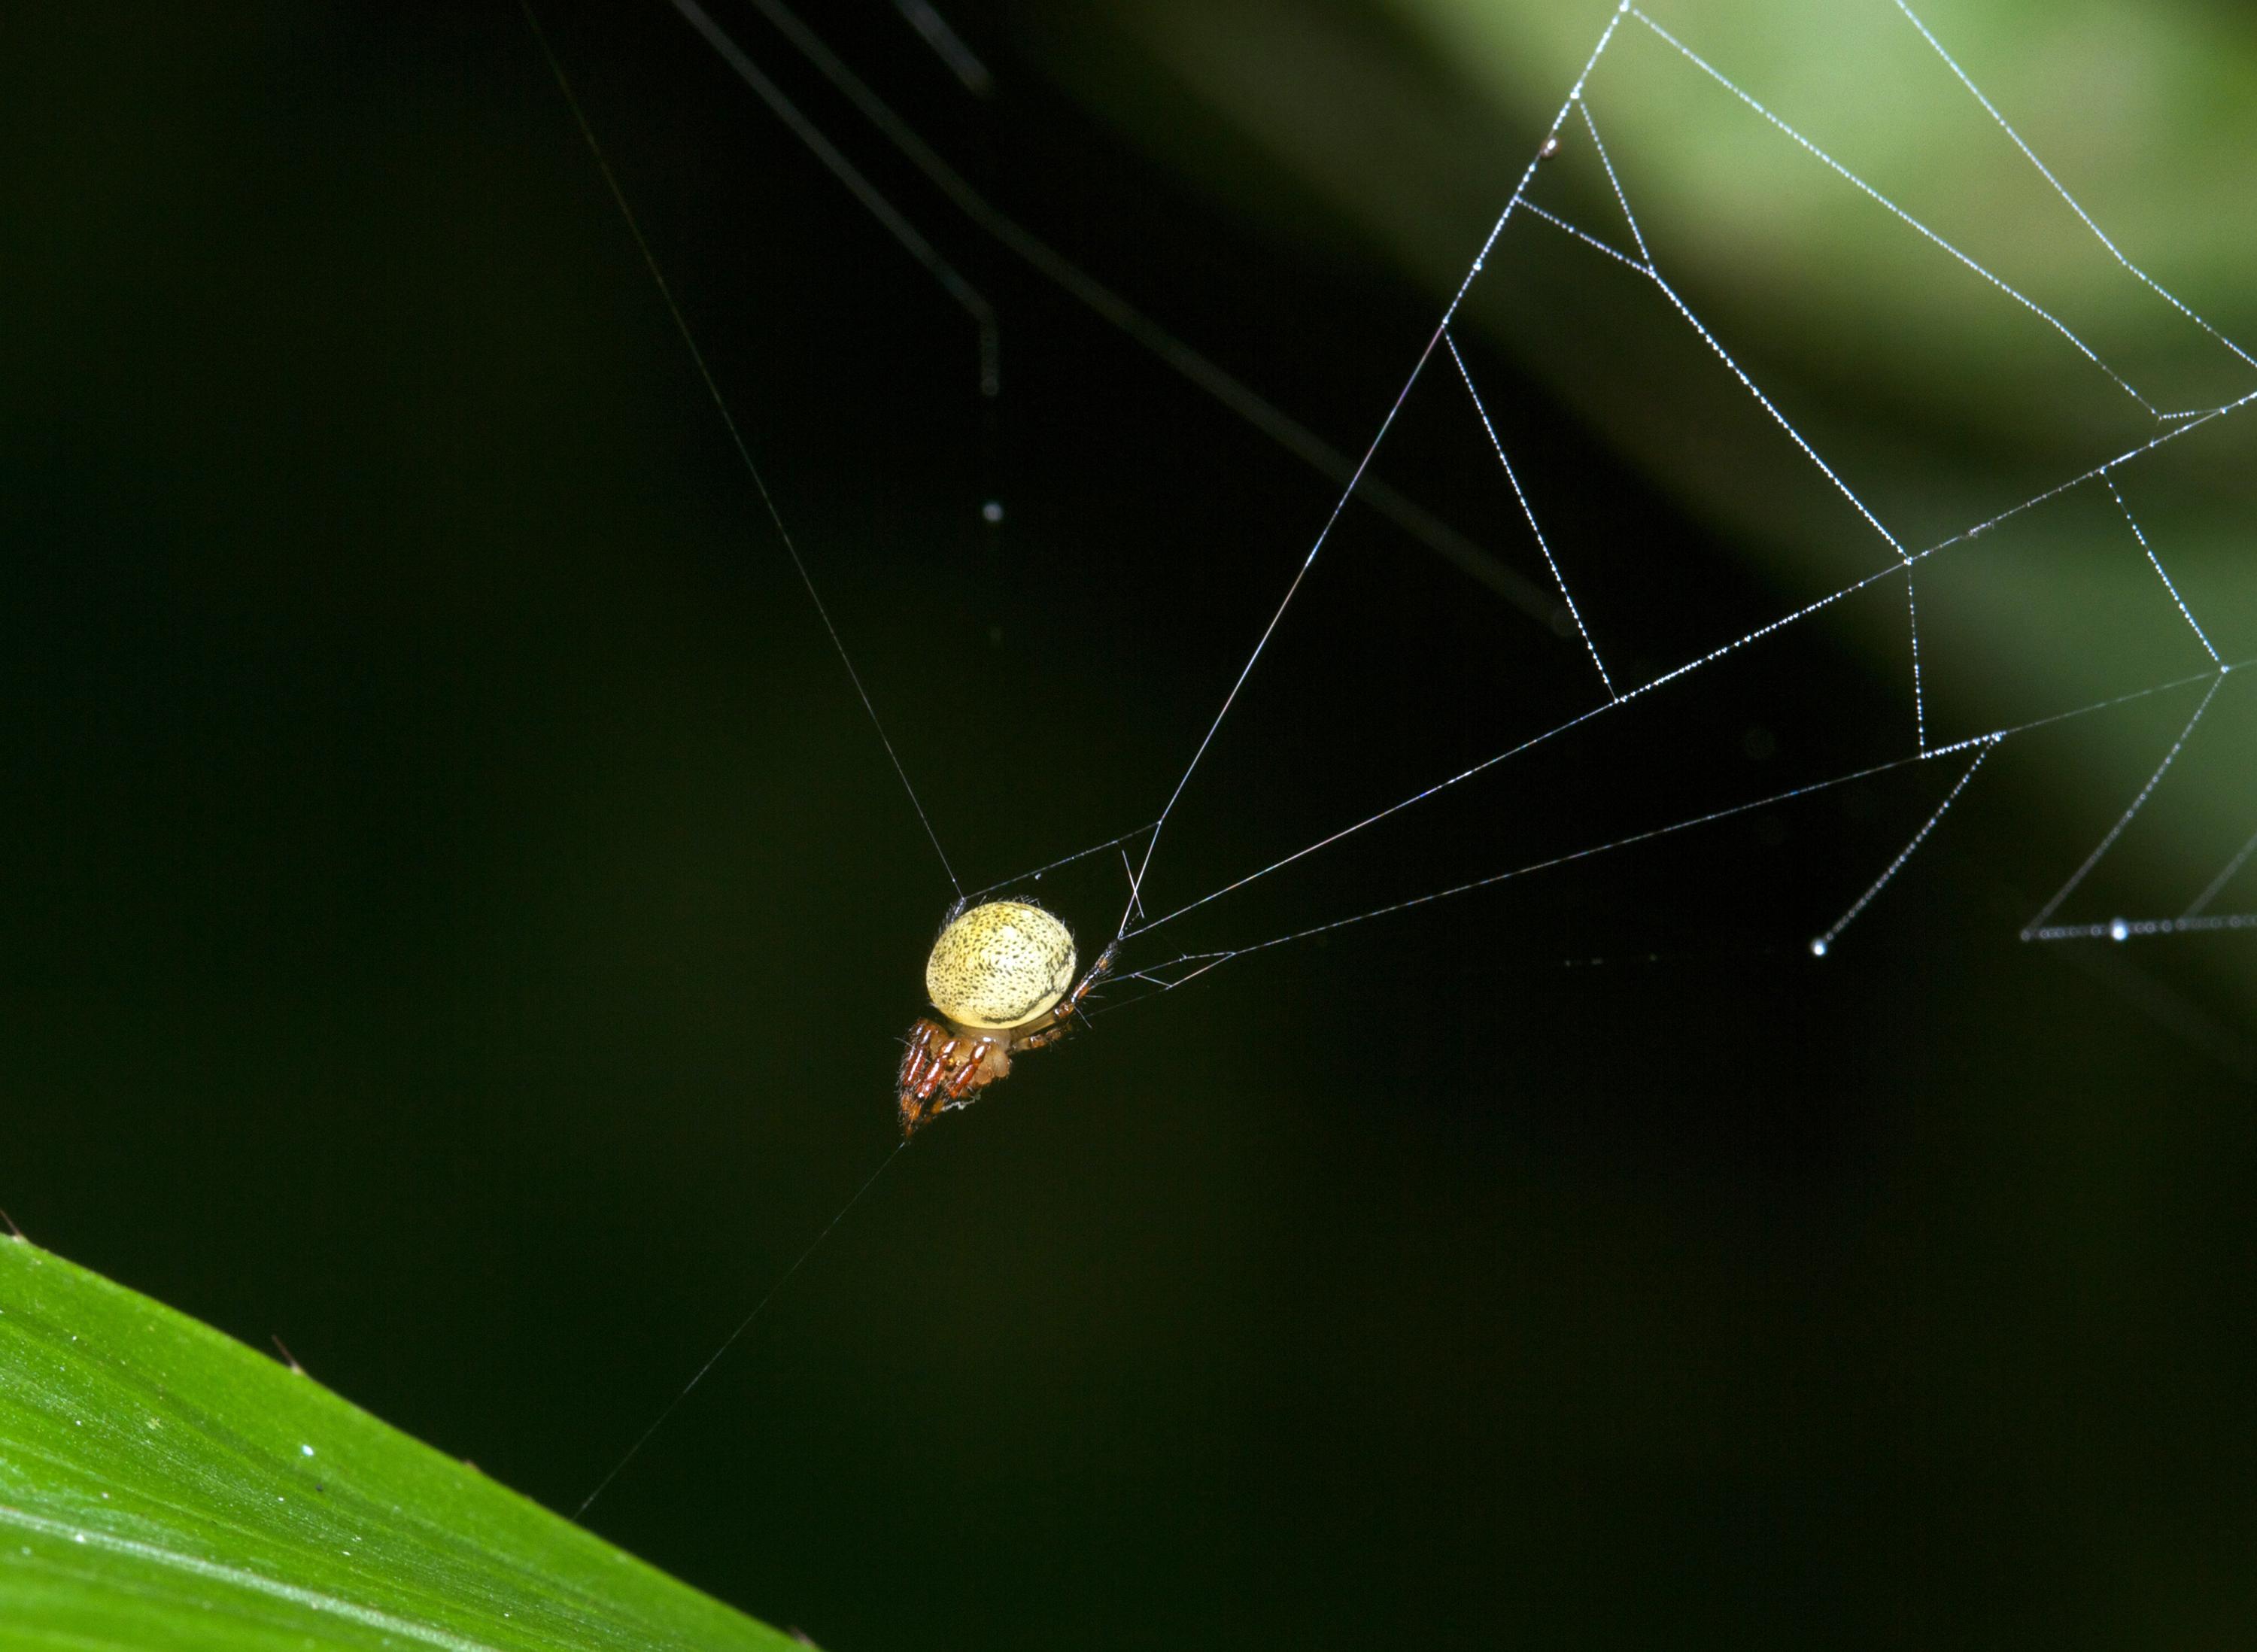 A slingshot spider is ready to launch its cone-shaped web at a flying insect. To do so, the spider will release a bundle of silk, allowing the tension line to release and catapult both the spider and the web. (Credit: Lawrence E. Reeves)